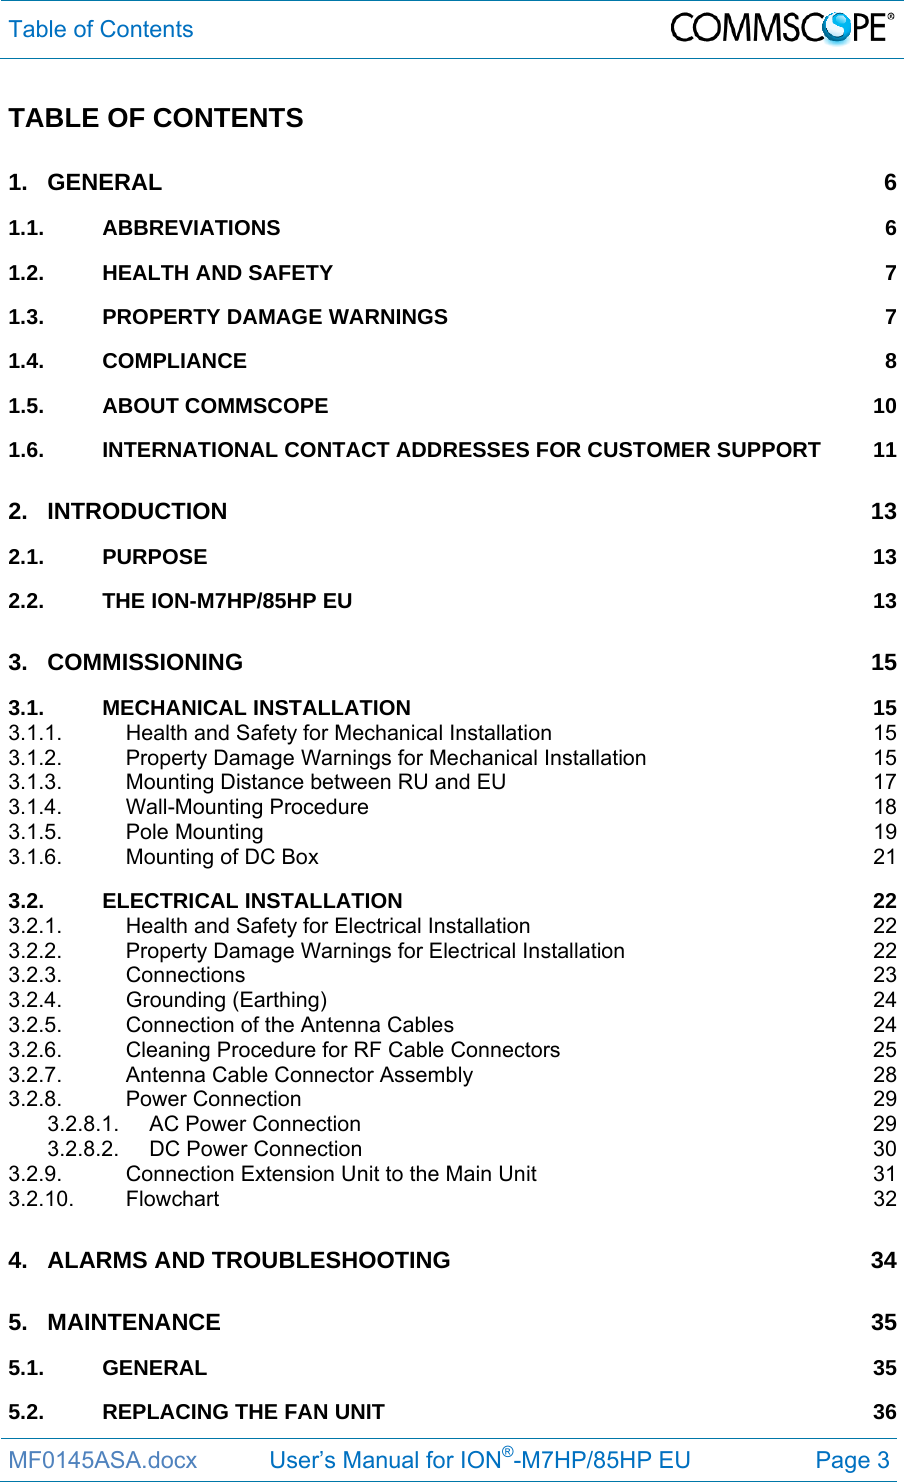 Table of Contents  MF0145ASA.docx           User’s Manual for ION®-M7HP/85HP EU  Page 3 TABLE OF CONTENTS 1.GENERAL 61.1.ABBREVIATIONS 61.2.HEALTH AND SAFETY  71.3.PROPERTY DAMAGE WARNINGS  71.4.COMPLIANCE 81.5.ABOUT COMMSCOPE  101.6.INTERNATIONAL CONTACT ADDRESSES FOR CUSTOMER SUPPORT  112.INTRODUCTION 132.1.PURPOSE 132.2.THE ION-M7HP/85HP EU  133.COMMISSIONING 153.1.MECHANICAL INSTALLATION  153.1.1.Health and Safety for Mechanical Installation  153.1.2.Property Damage Warnings for Mechanical Installation  153.1.3.Mounting Distance between RU and EU  173.1.4.Wall-Mounting Procedure  183.1.5.Pole Mounting  193.1.6.Mounting of DC Box  213.2.ELECTRICAL INSTALLATION  223.2.1.Health and Safety for Electrical Installation  223.2.2.Property Damage Warnings for Electrical Installation  223.2.3.Connections 233.2.4.Grounding (Earthing)  243.2.5.Connection of the Antenna Cables  243.2.6.Cleaning Procedure for RF Cable Connectors  253.2.7.Antenna Cable Connector Assembly  283.2.8.Power Connection  293.2.8.1.AC Power Connection  293.2.8.2.DC Power Connection  303.2.9.Connection Extension Unit to the Main Unit  313.2.10.Flowchart 324.ALARMS AND TROUBLESHOOTING  345.MAINTENANCE 355.1.GENERAL 355.2.REPLACING THE FAN UNIT  36